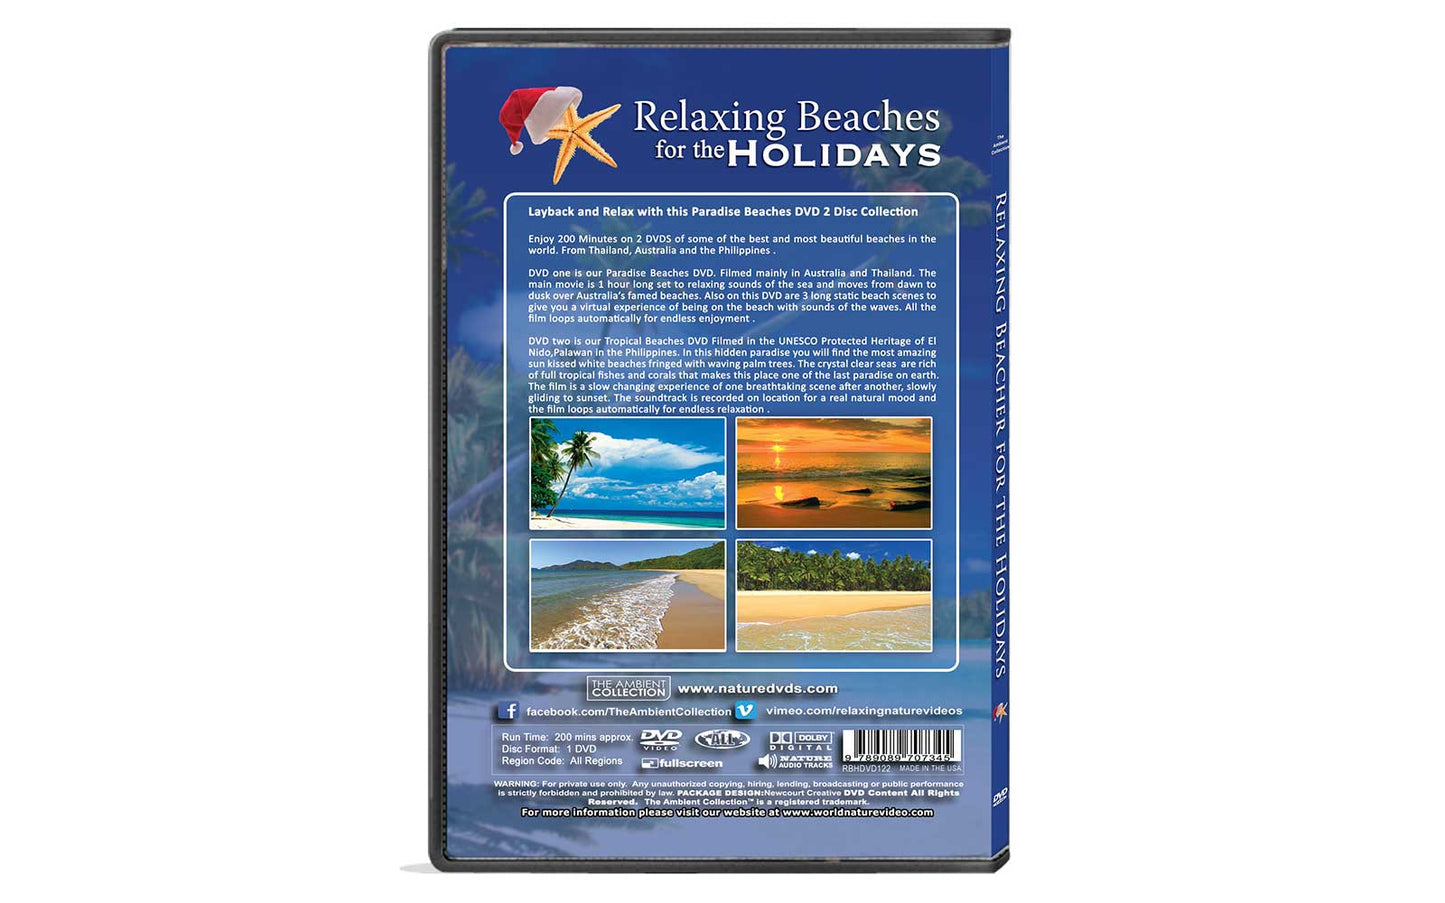 Relaxing Beaches for the Holidays